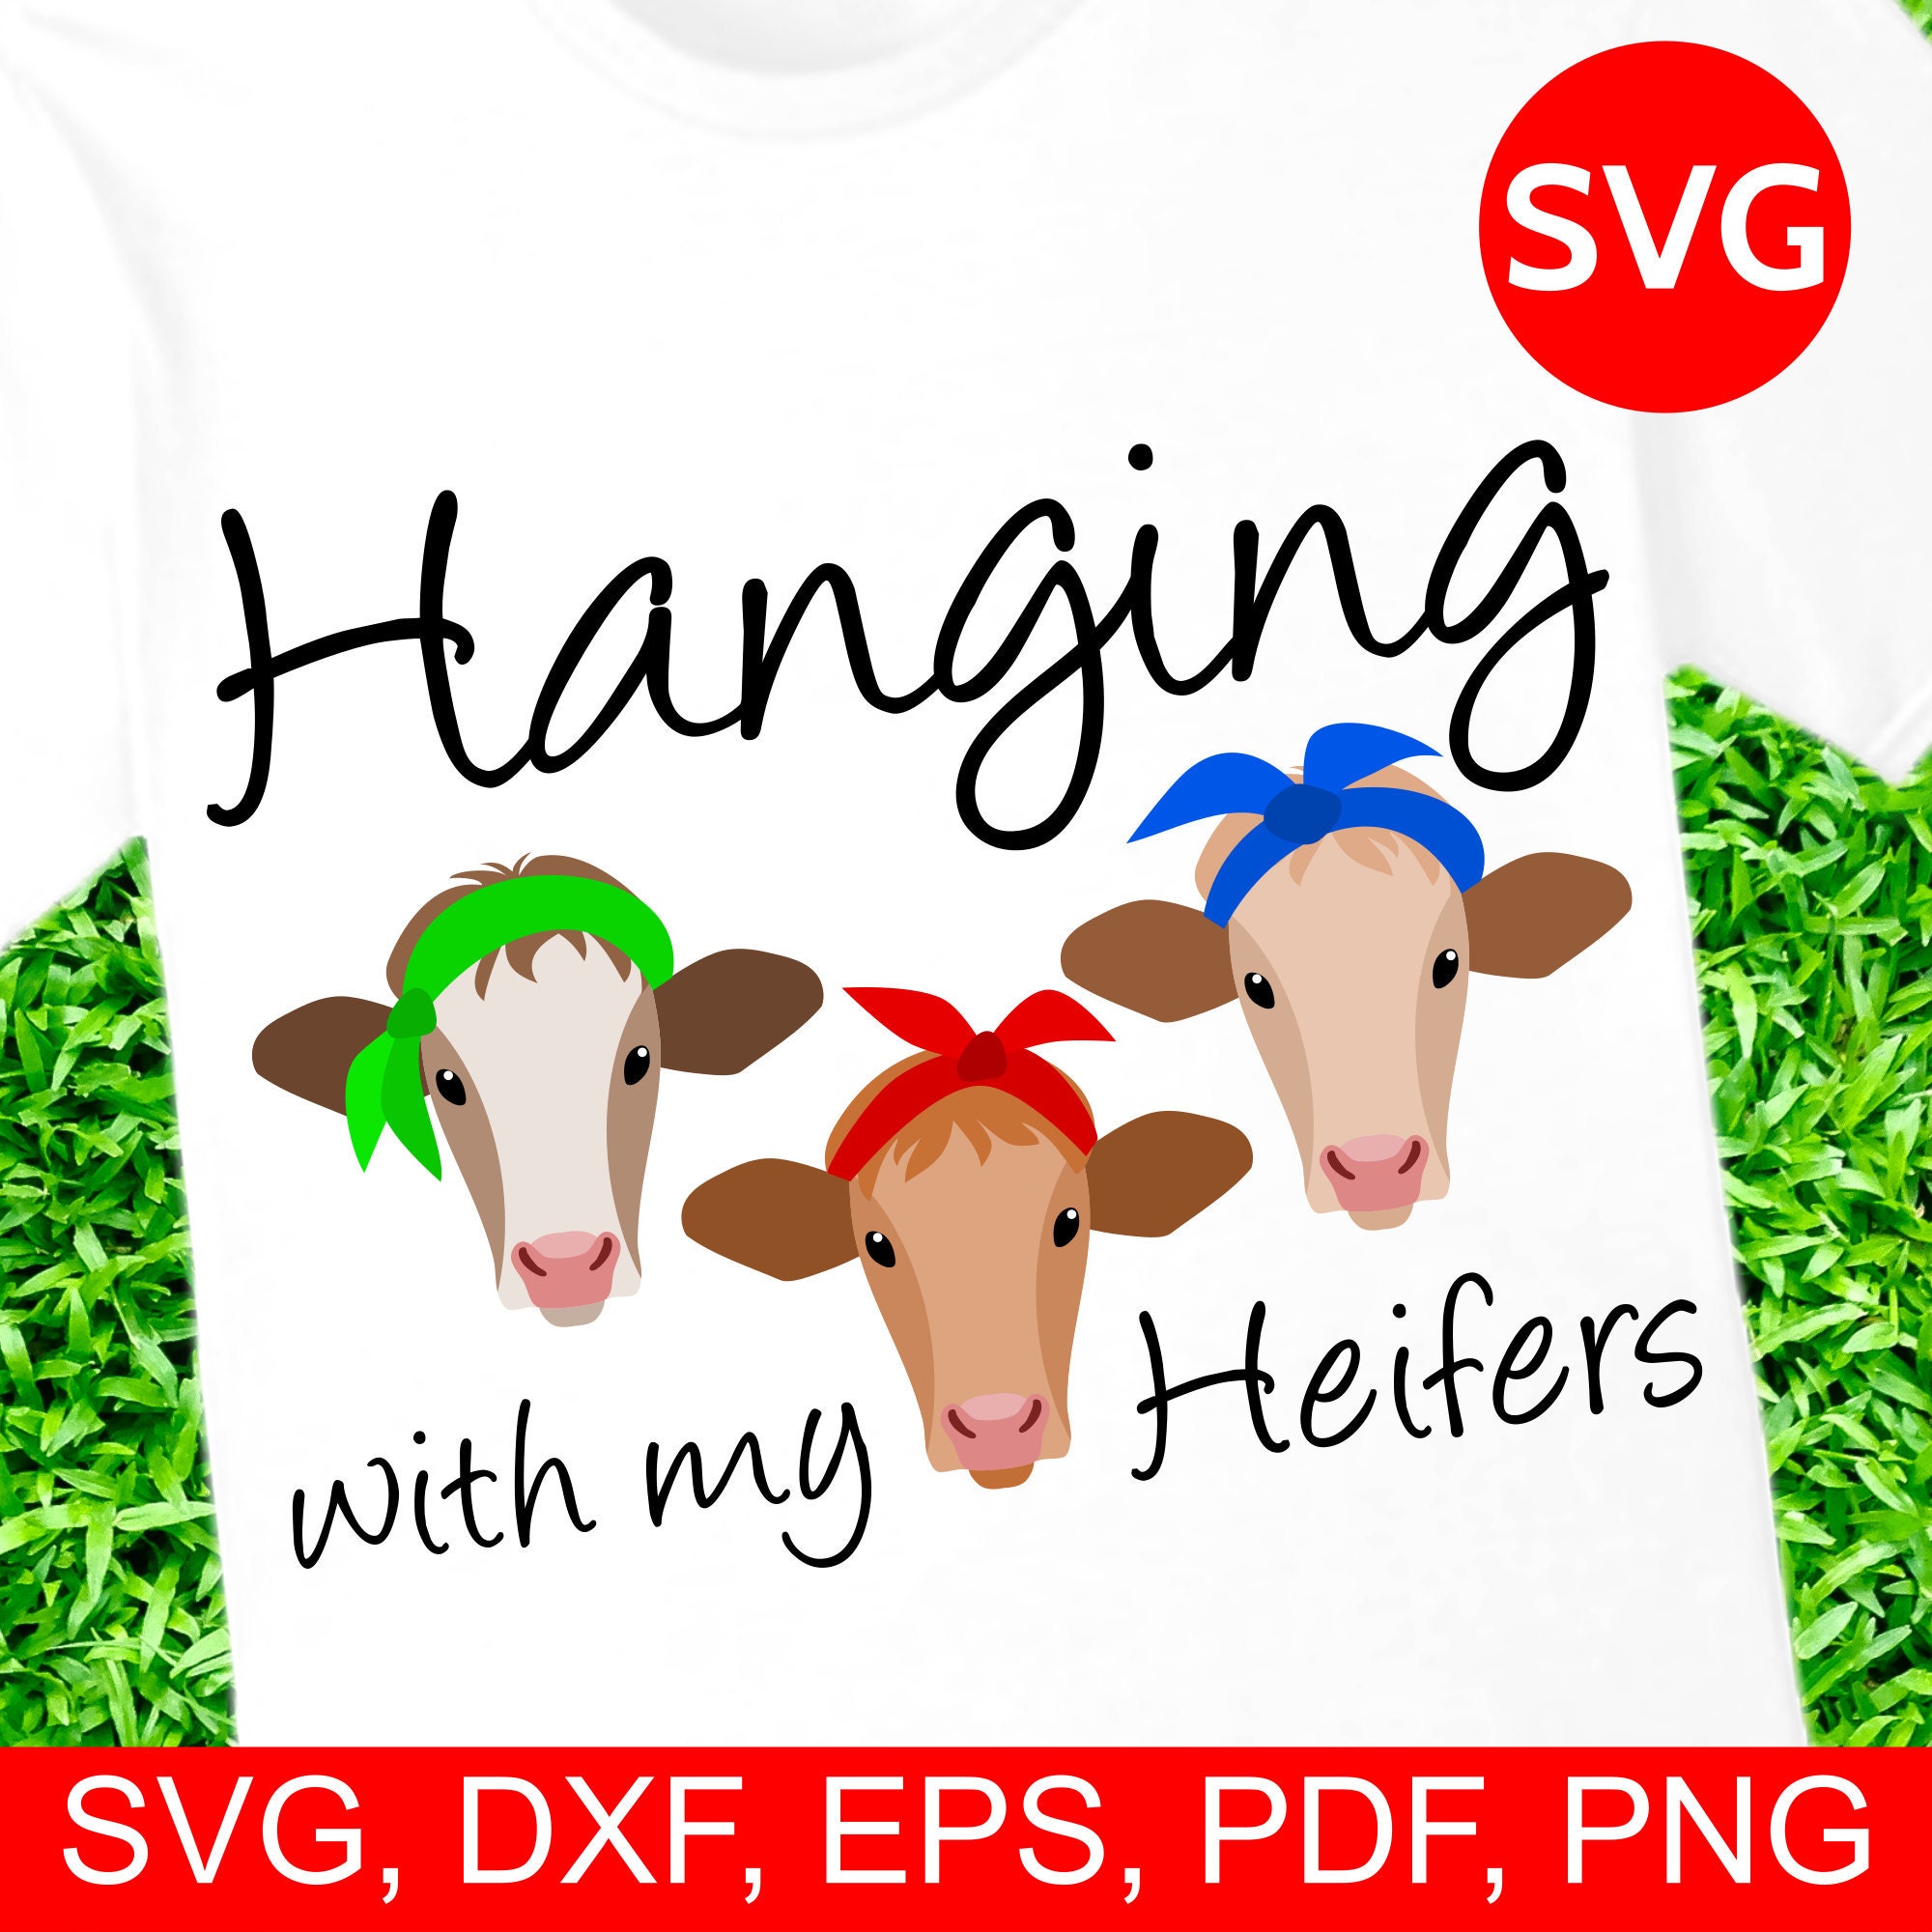 Hanging with my heifers tshirt design